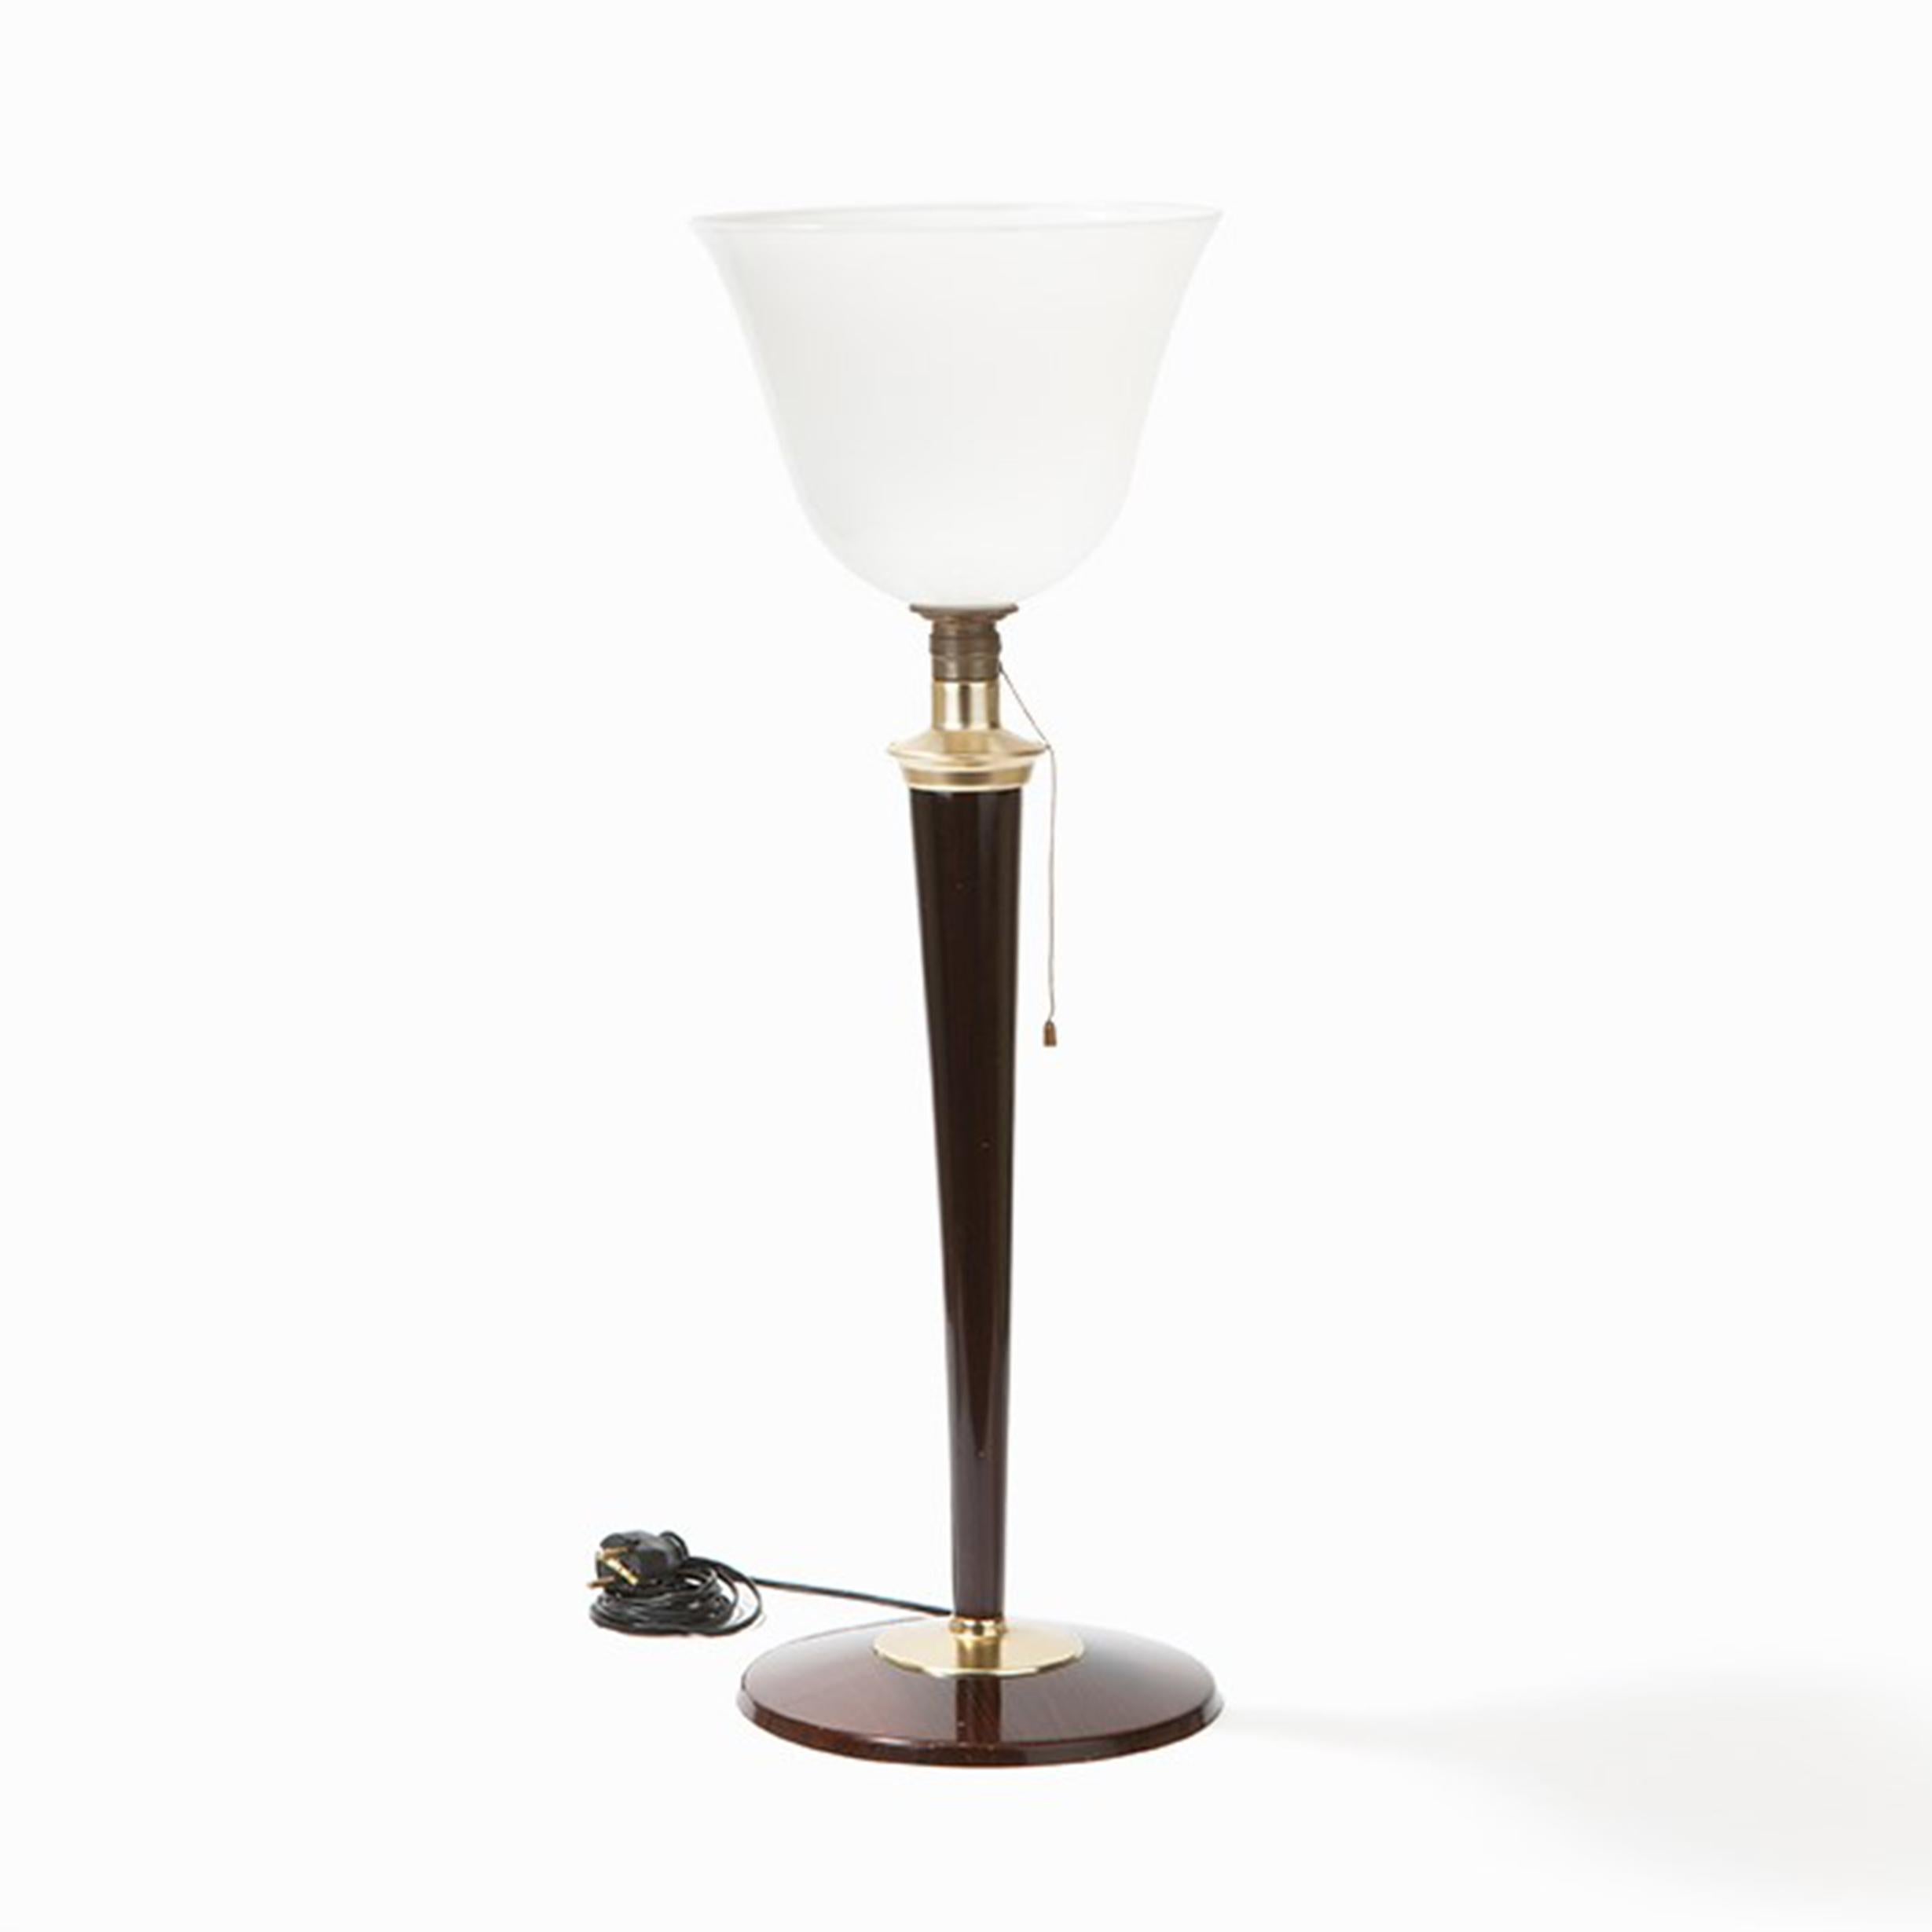 Art Deco desk uplighter lamp, designed by Mazda France in the 1930s. Mahogany lacquered metal base, wooden body topped with tulip shaped opaline glass shade and brass fittings. UK wired.